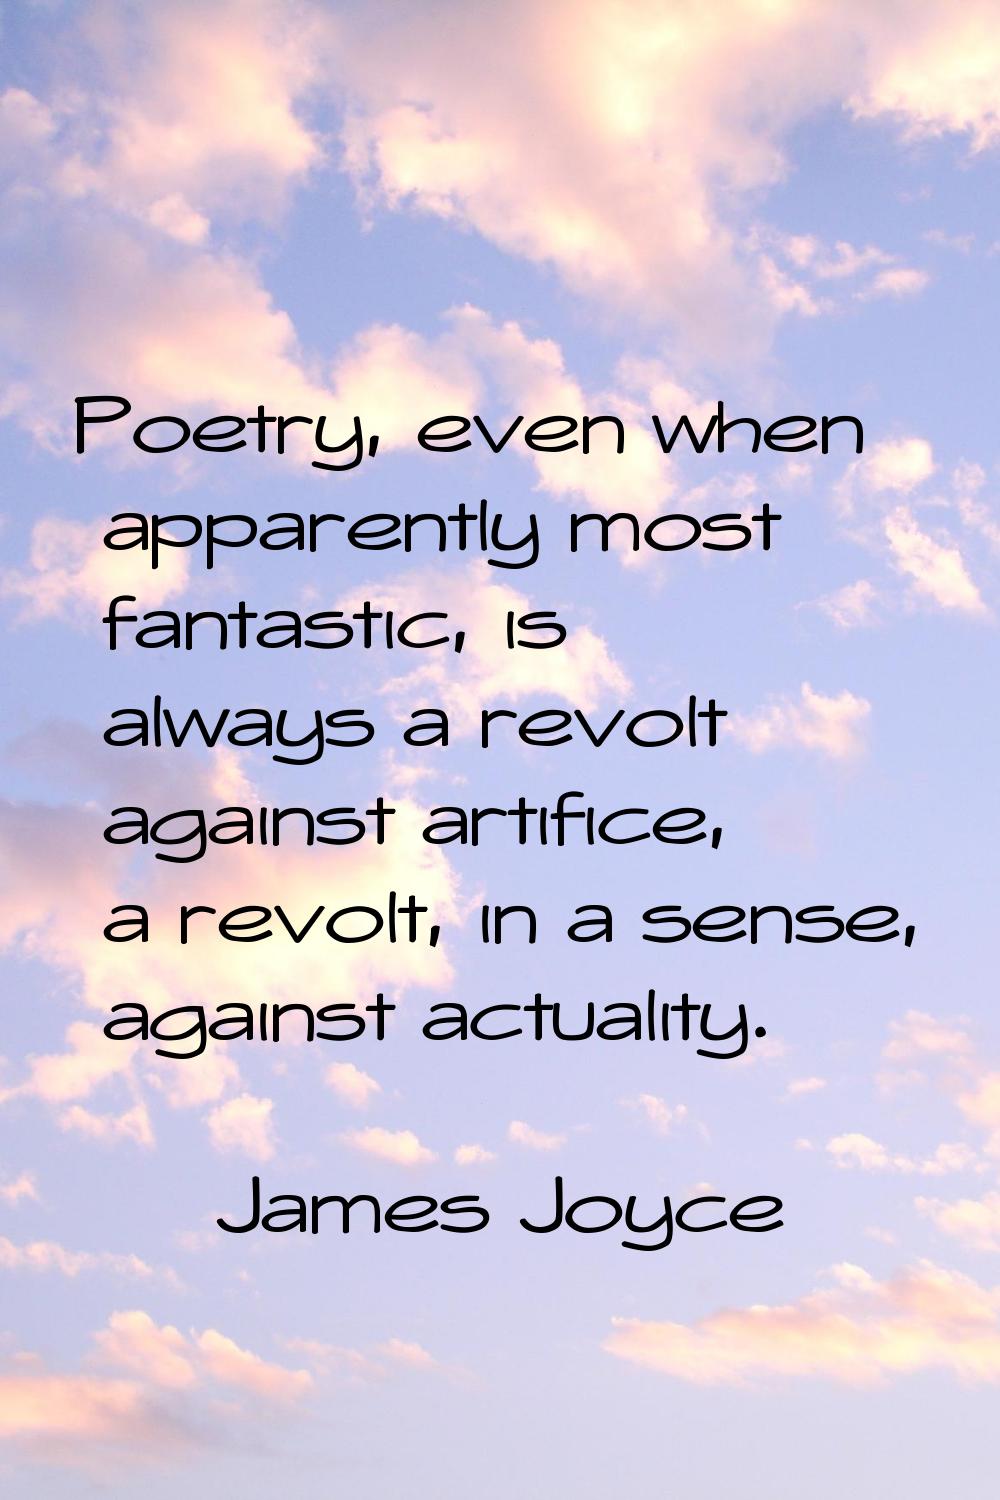 Poetry, even when apparently most fantastic, is always a revolt against artifice, a revolt, in a se